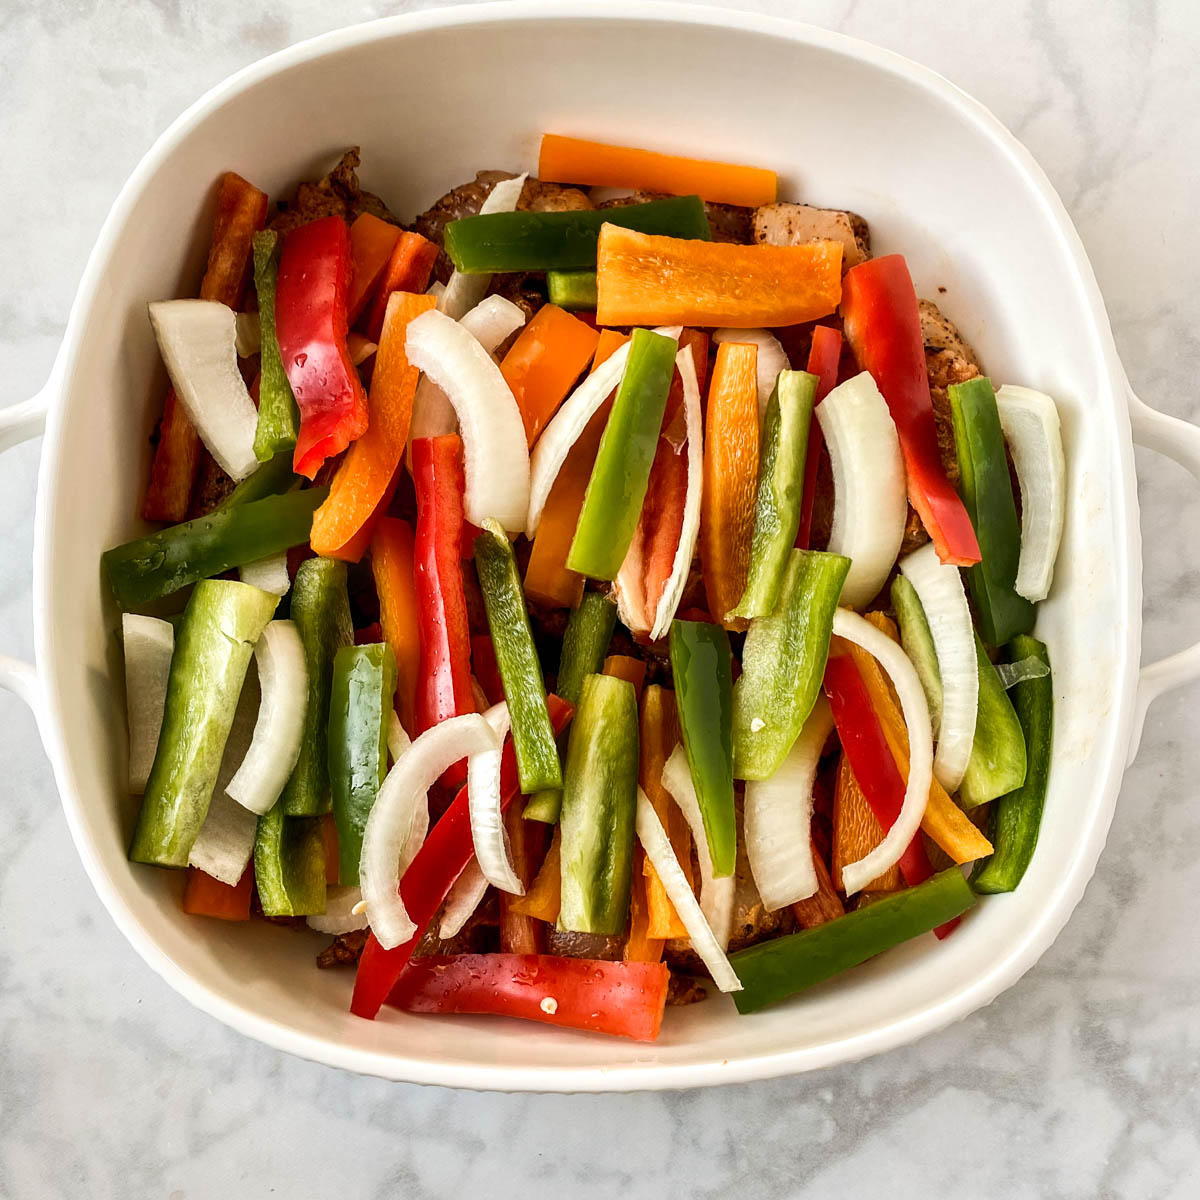 sliced peppers in a casserole dish